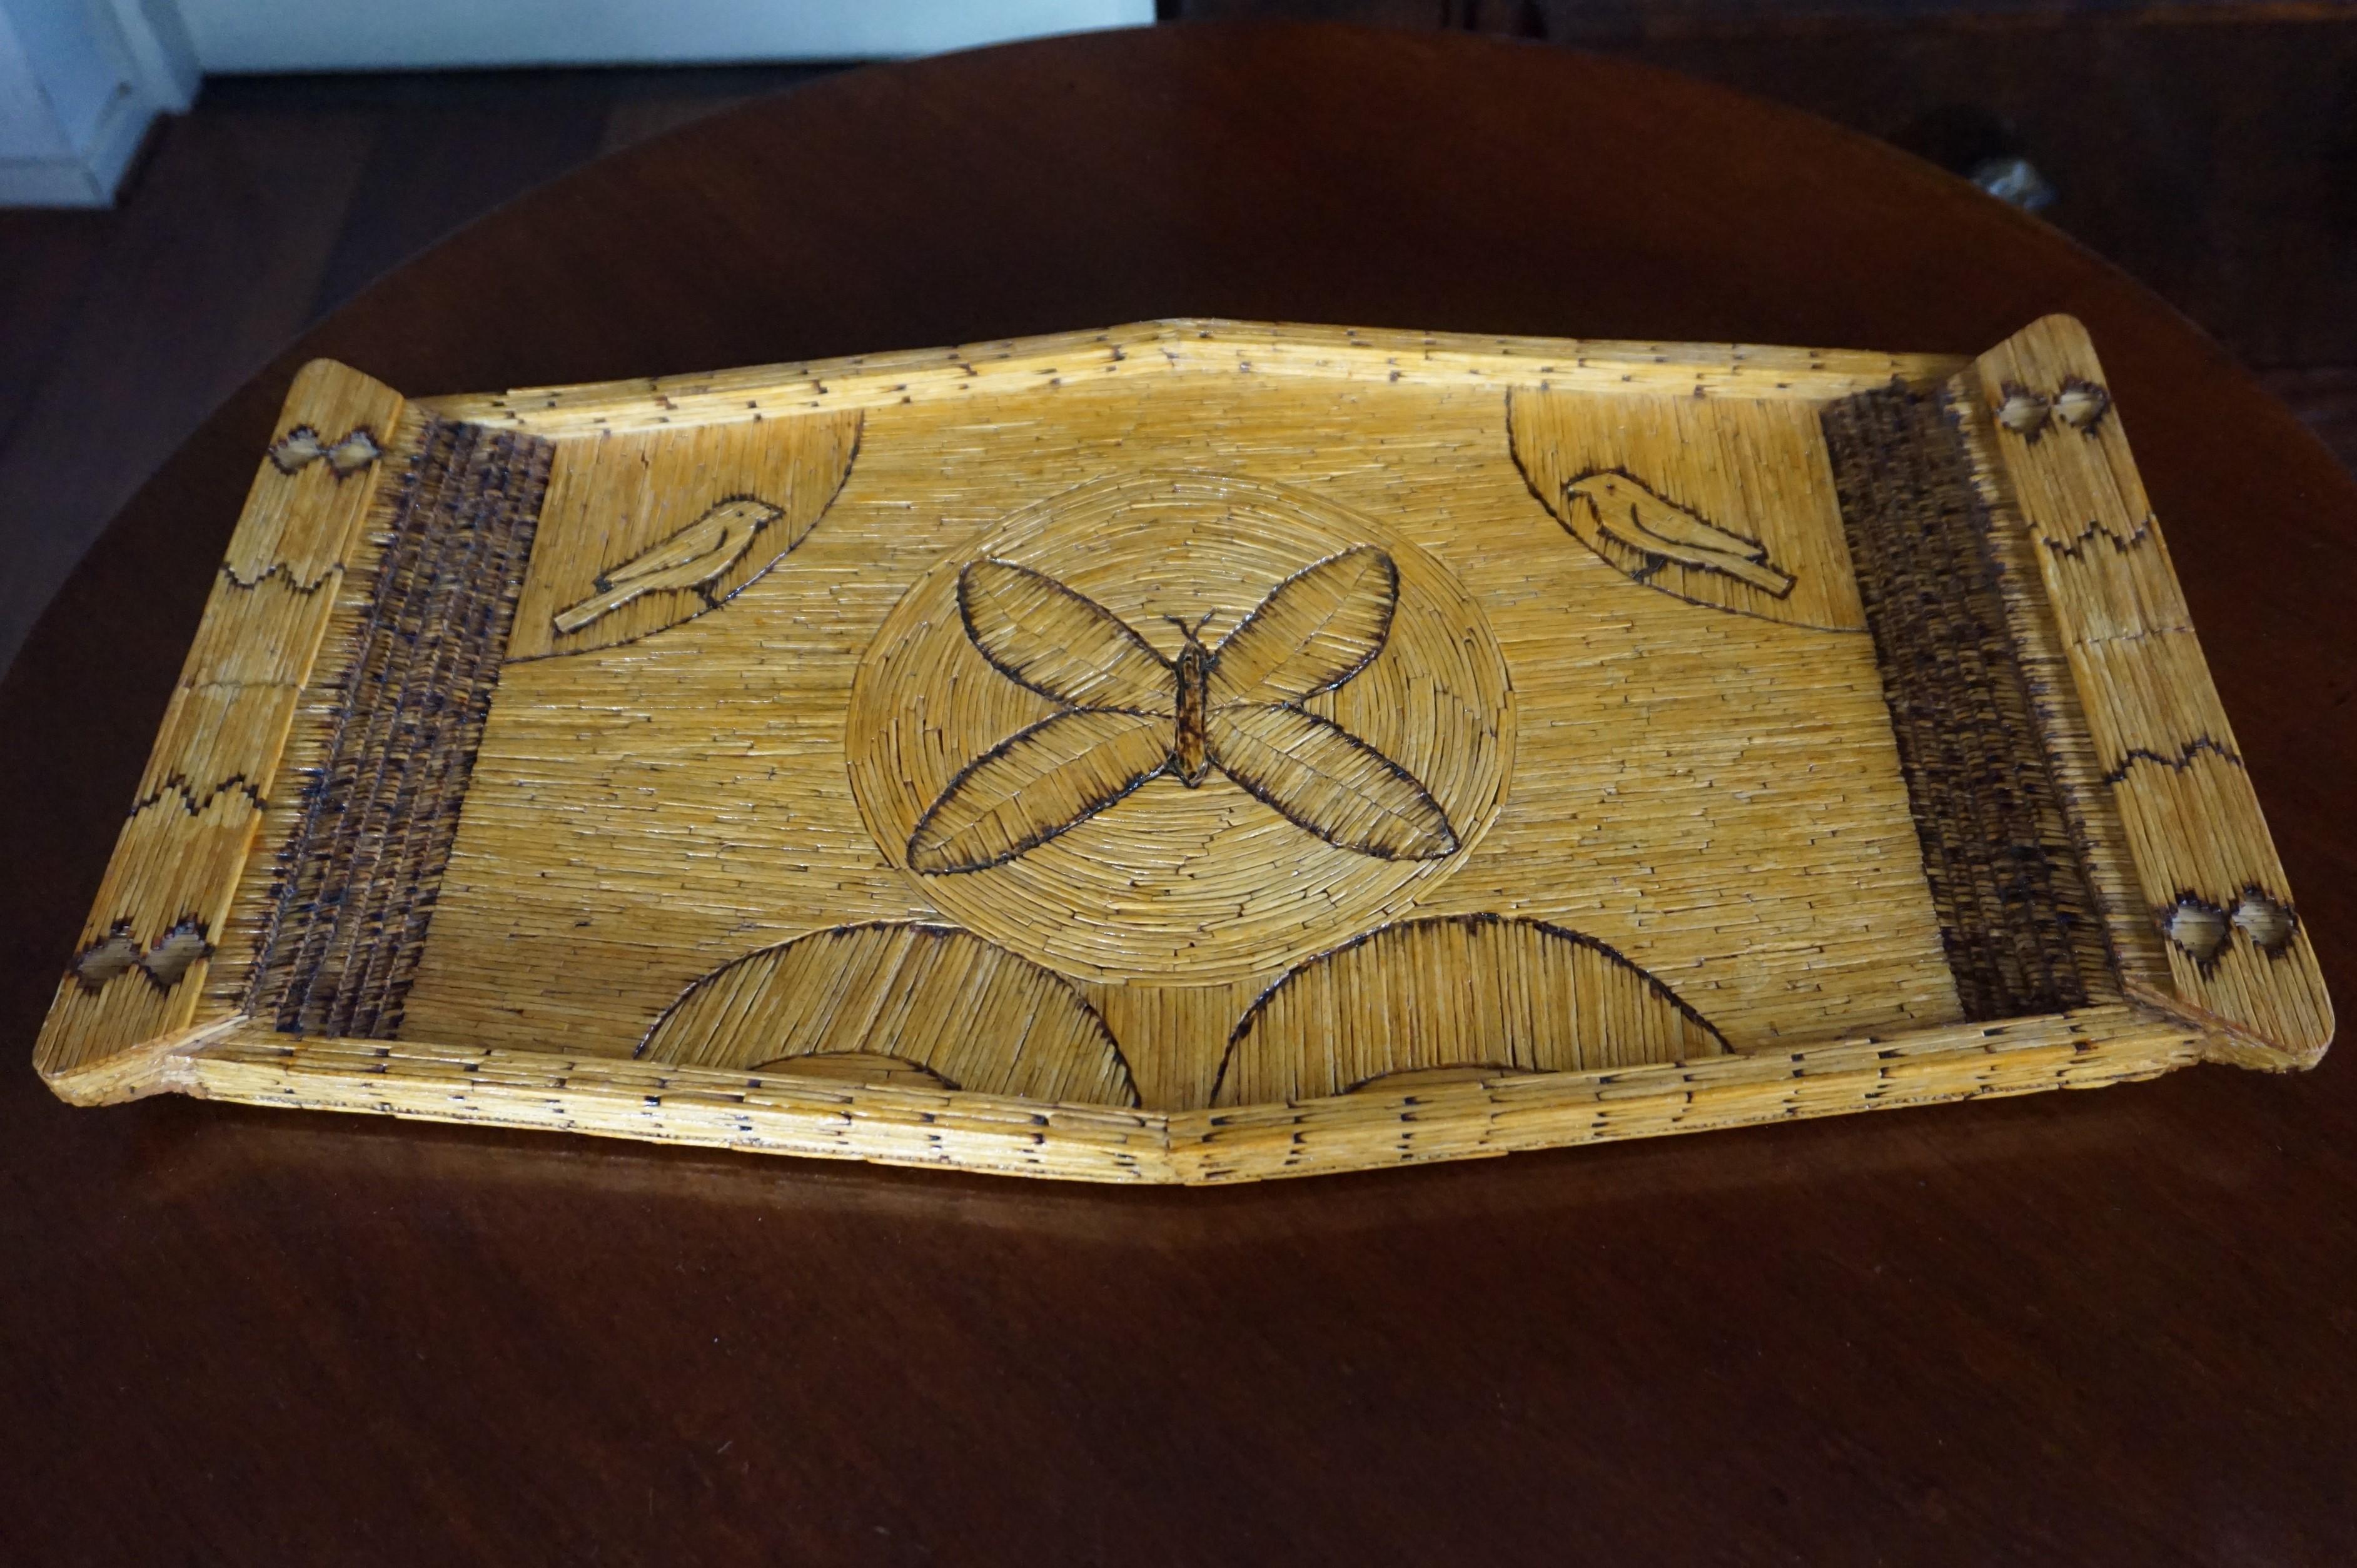 Midcentury Folk Art Serving Tray with Butterly & Birds Handmade of Burnt Matches 5